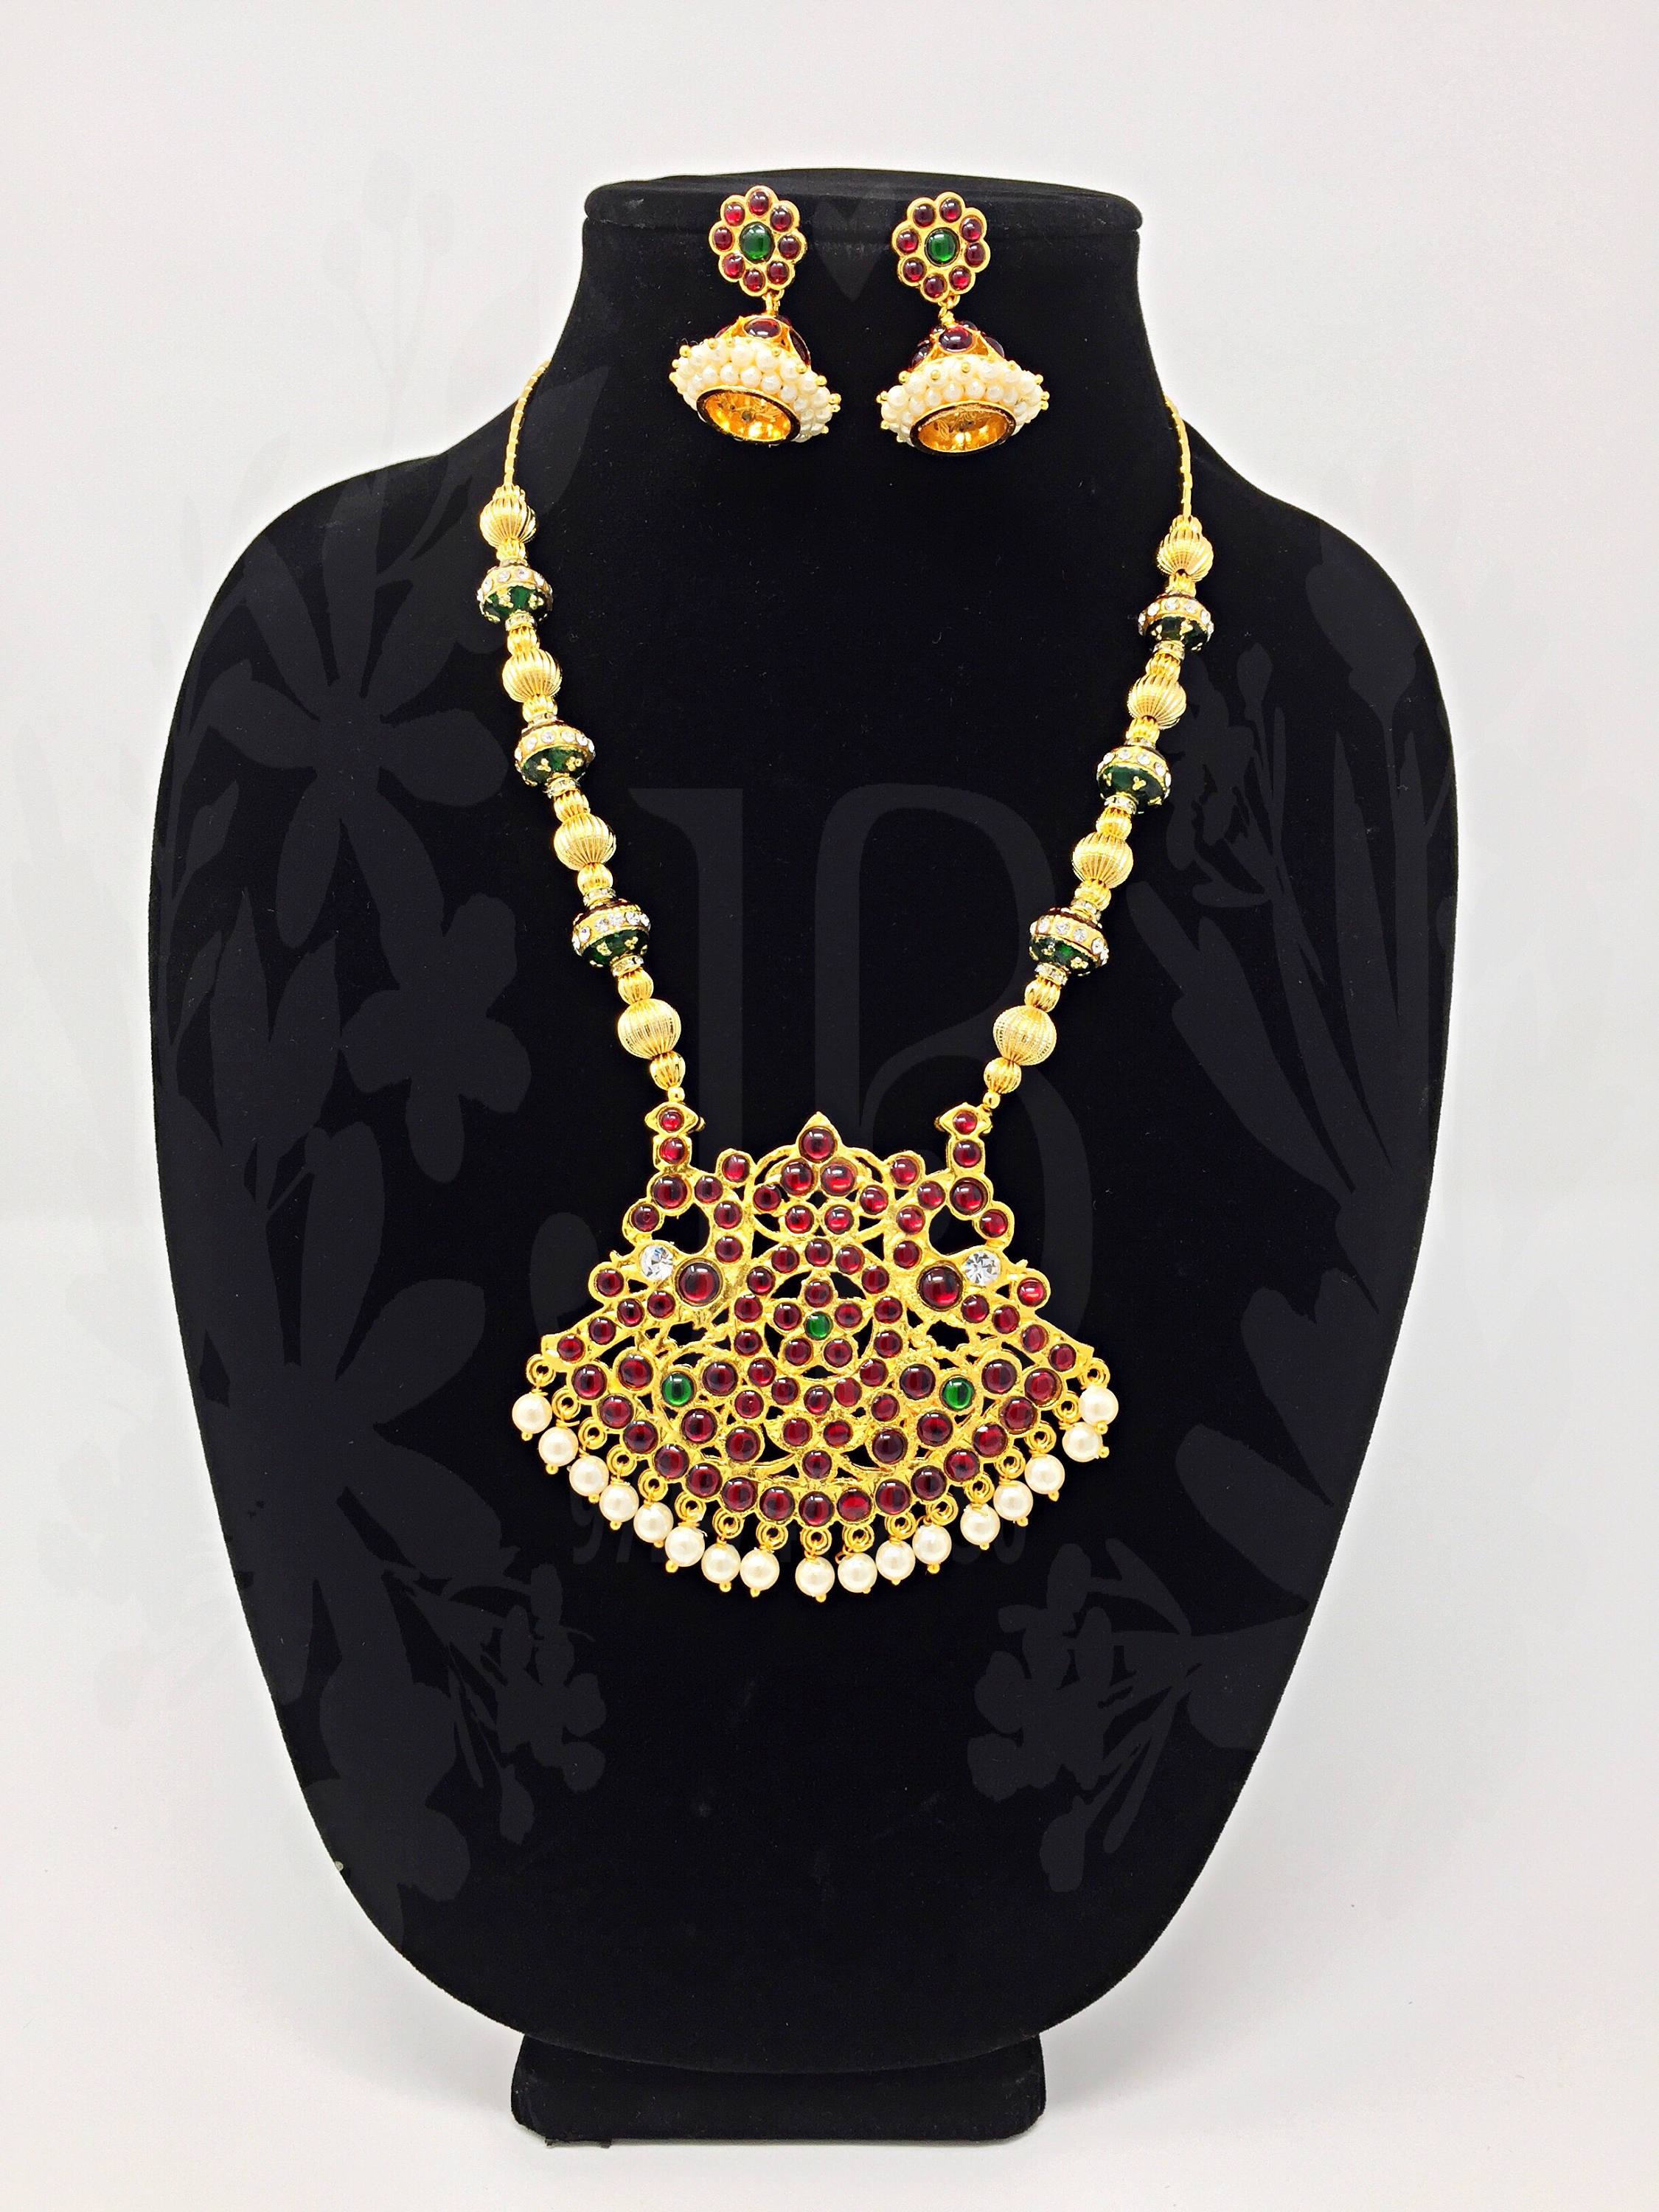 Buy South Indian Lakshmi Dollar Necklace Designs with Gold Beads Necklace  Buy Online